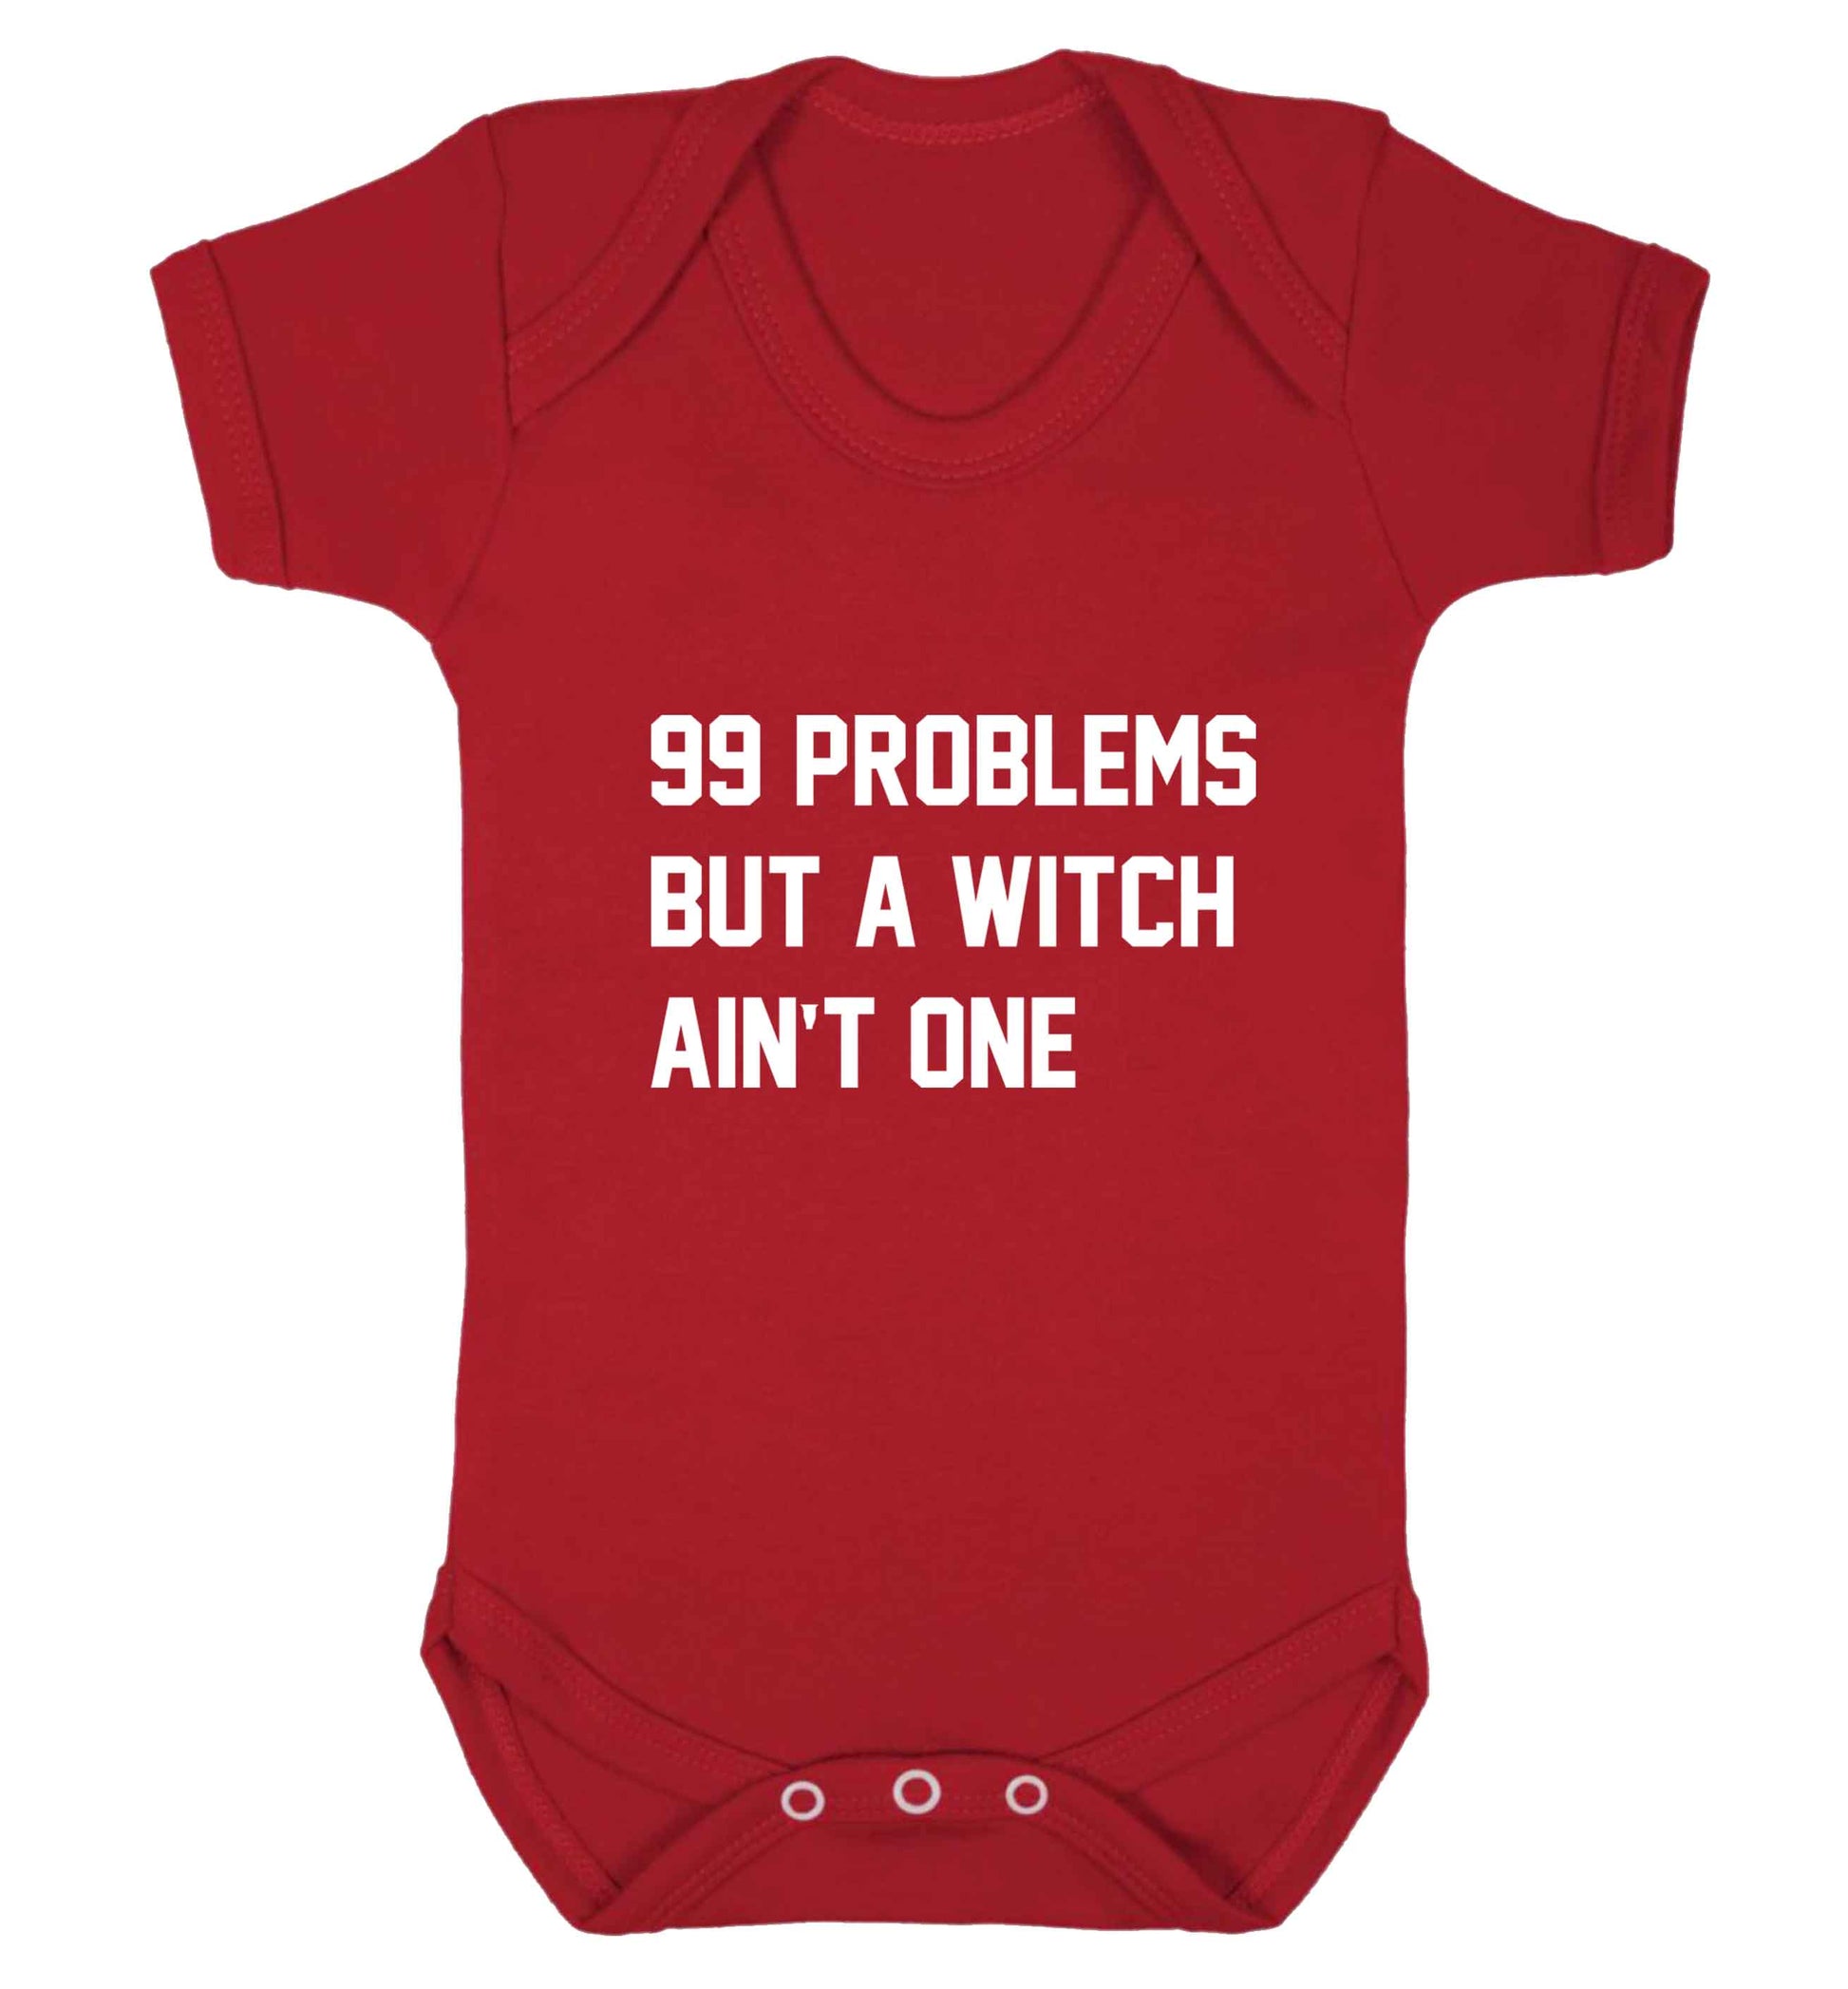 99 Problems but a witch aint one baby vest red 18-24 months